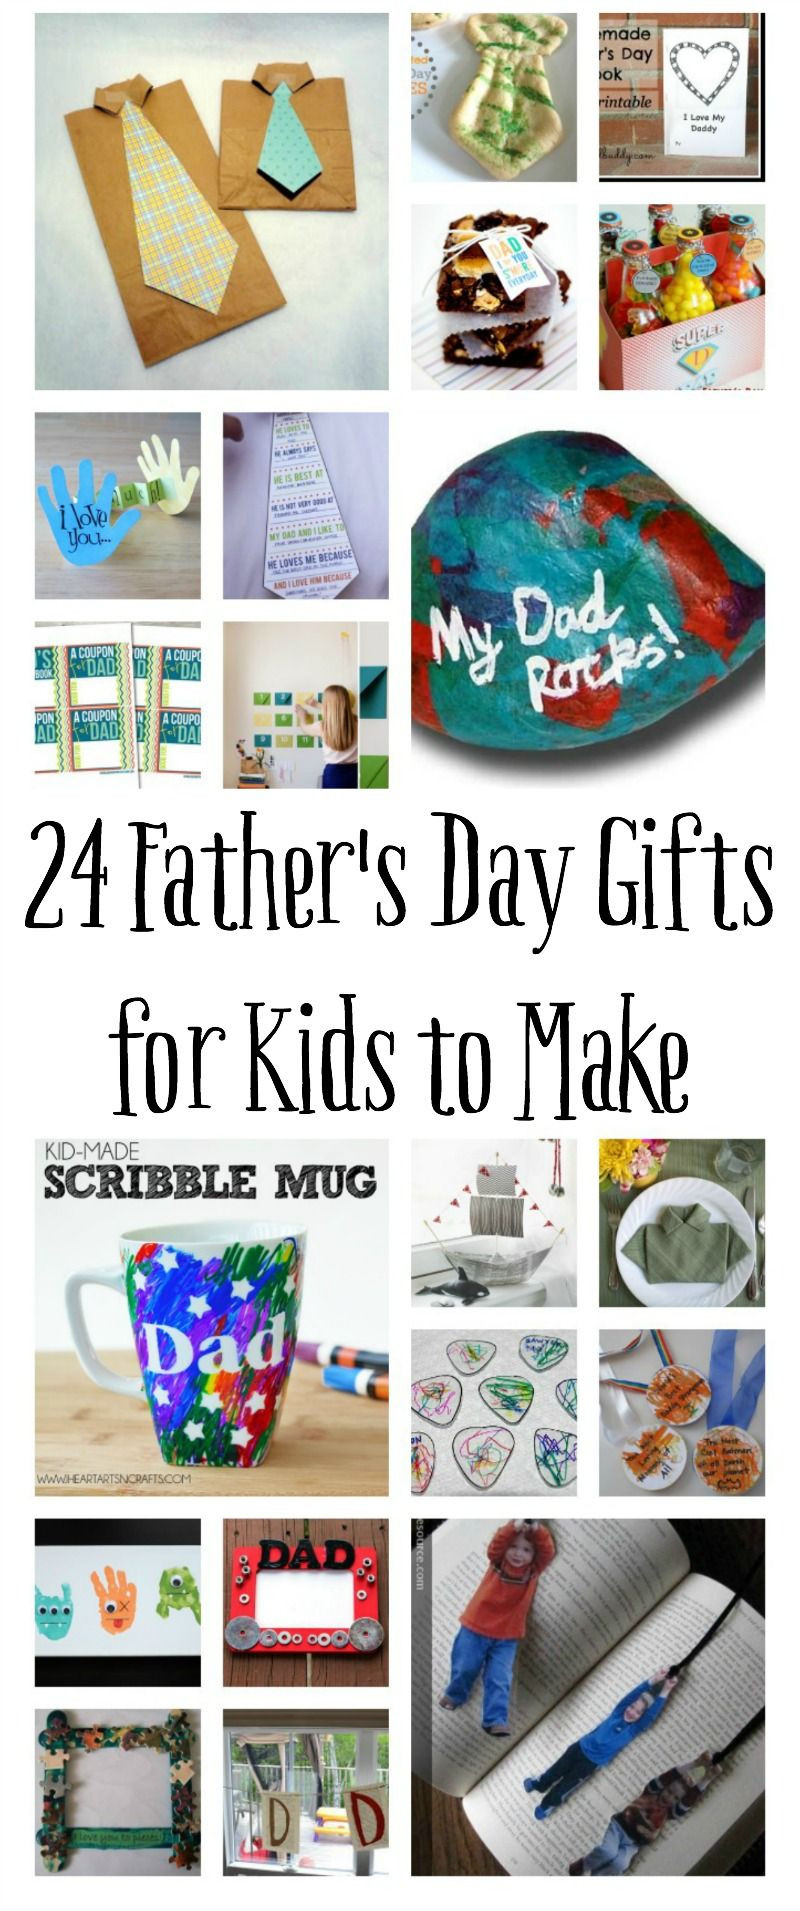 Father'S Day Gift Ideas To Make
 100 Homemade Father s Day Gifts for Kids to Make